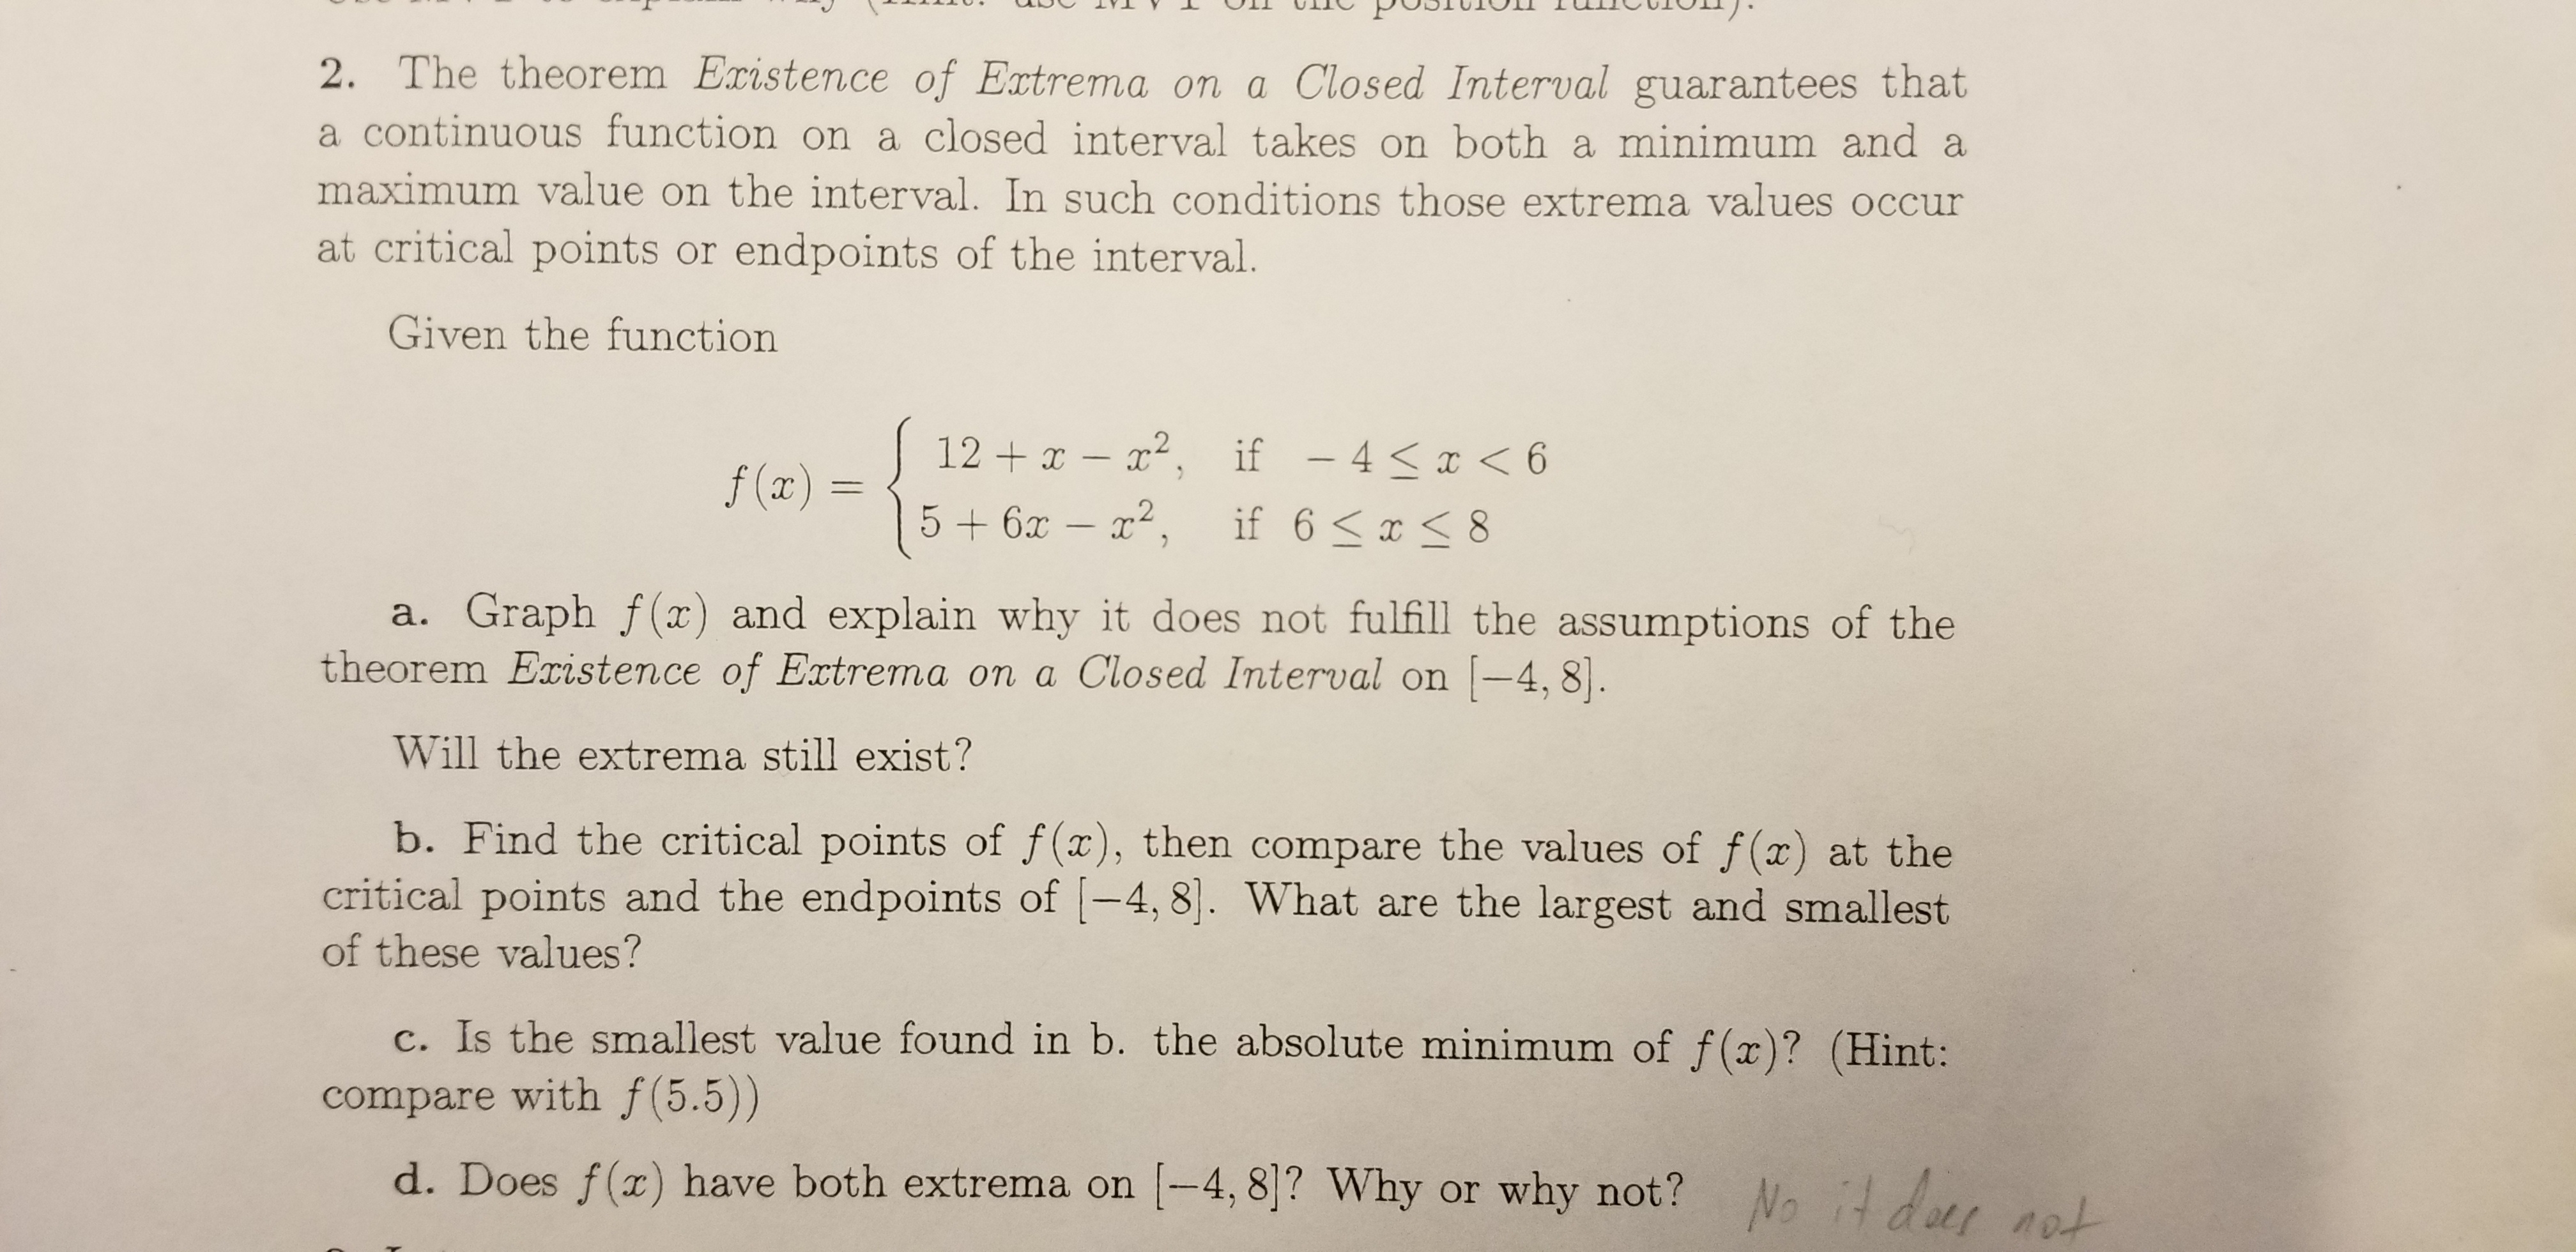 2. The theorem Existence of Extrema on a Closed Interval guarantees that
a continuous function on a closed interval takes on both a minimum and a
maximum value on the interval. In such conditions those extrema values occur
at critical points or endpoints of the interval.
Given the function
12 x - 2, if - 4x < 6
5+6x- 2,
f(x)
if 6 x 8
TC
a. Graph f(x) and explain why it does not fulfill the assumptions of the
theorem Existence of Extrema on a Closed Interval on -4, 8
Will the extrema still exist?
b. Find the critical points of f(x), then compare the values of f(x) at the
critical points and the endpoints of -4, 8. What are the largest and smallest
of these values?
Is the smallest value found in b. the absolute minimum of f(x)? (Hint:
compare with f(5.5))
d. Does f(x) have both extrema on -4, 8]? Why or why not?
No it der nat
